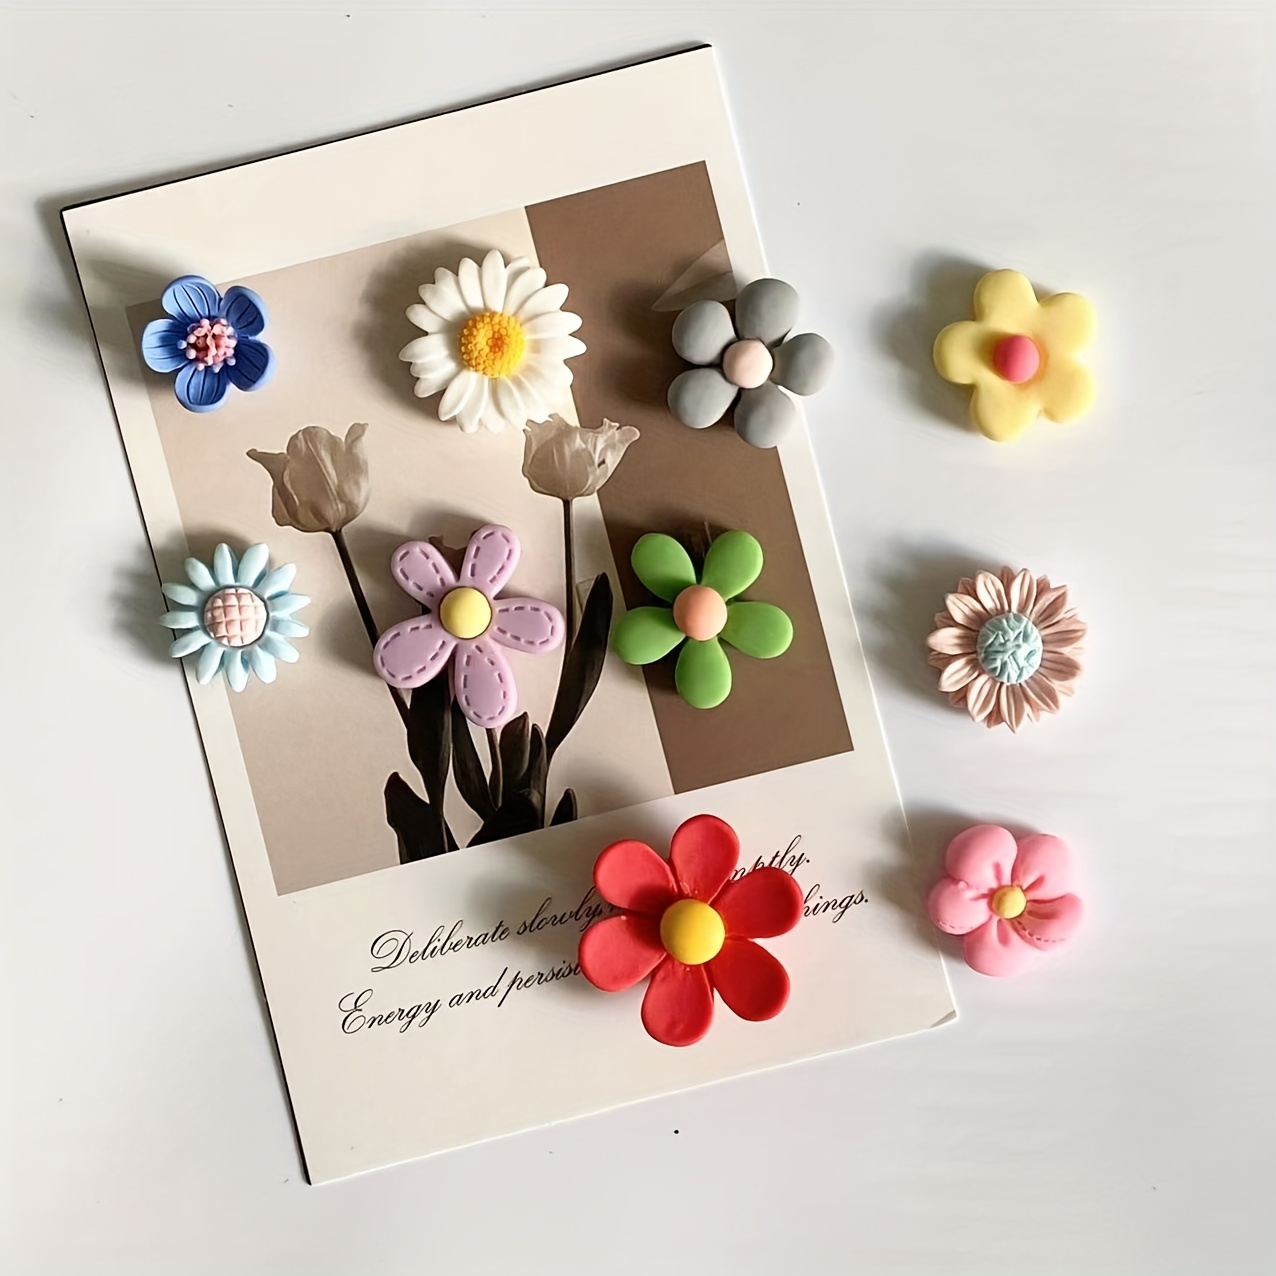 Pretty Hand Embroidery Magnets for Your Fridge - DIY Candy